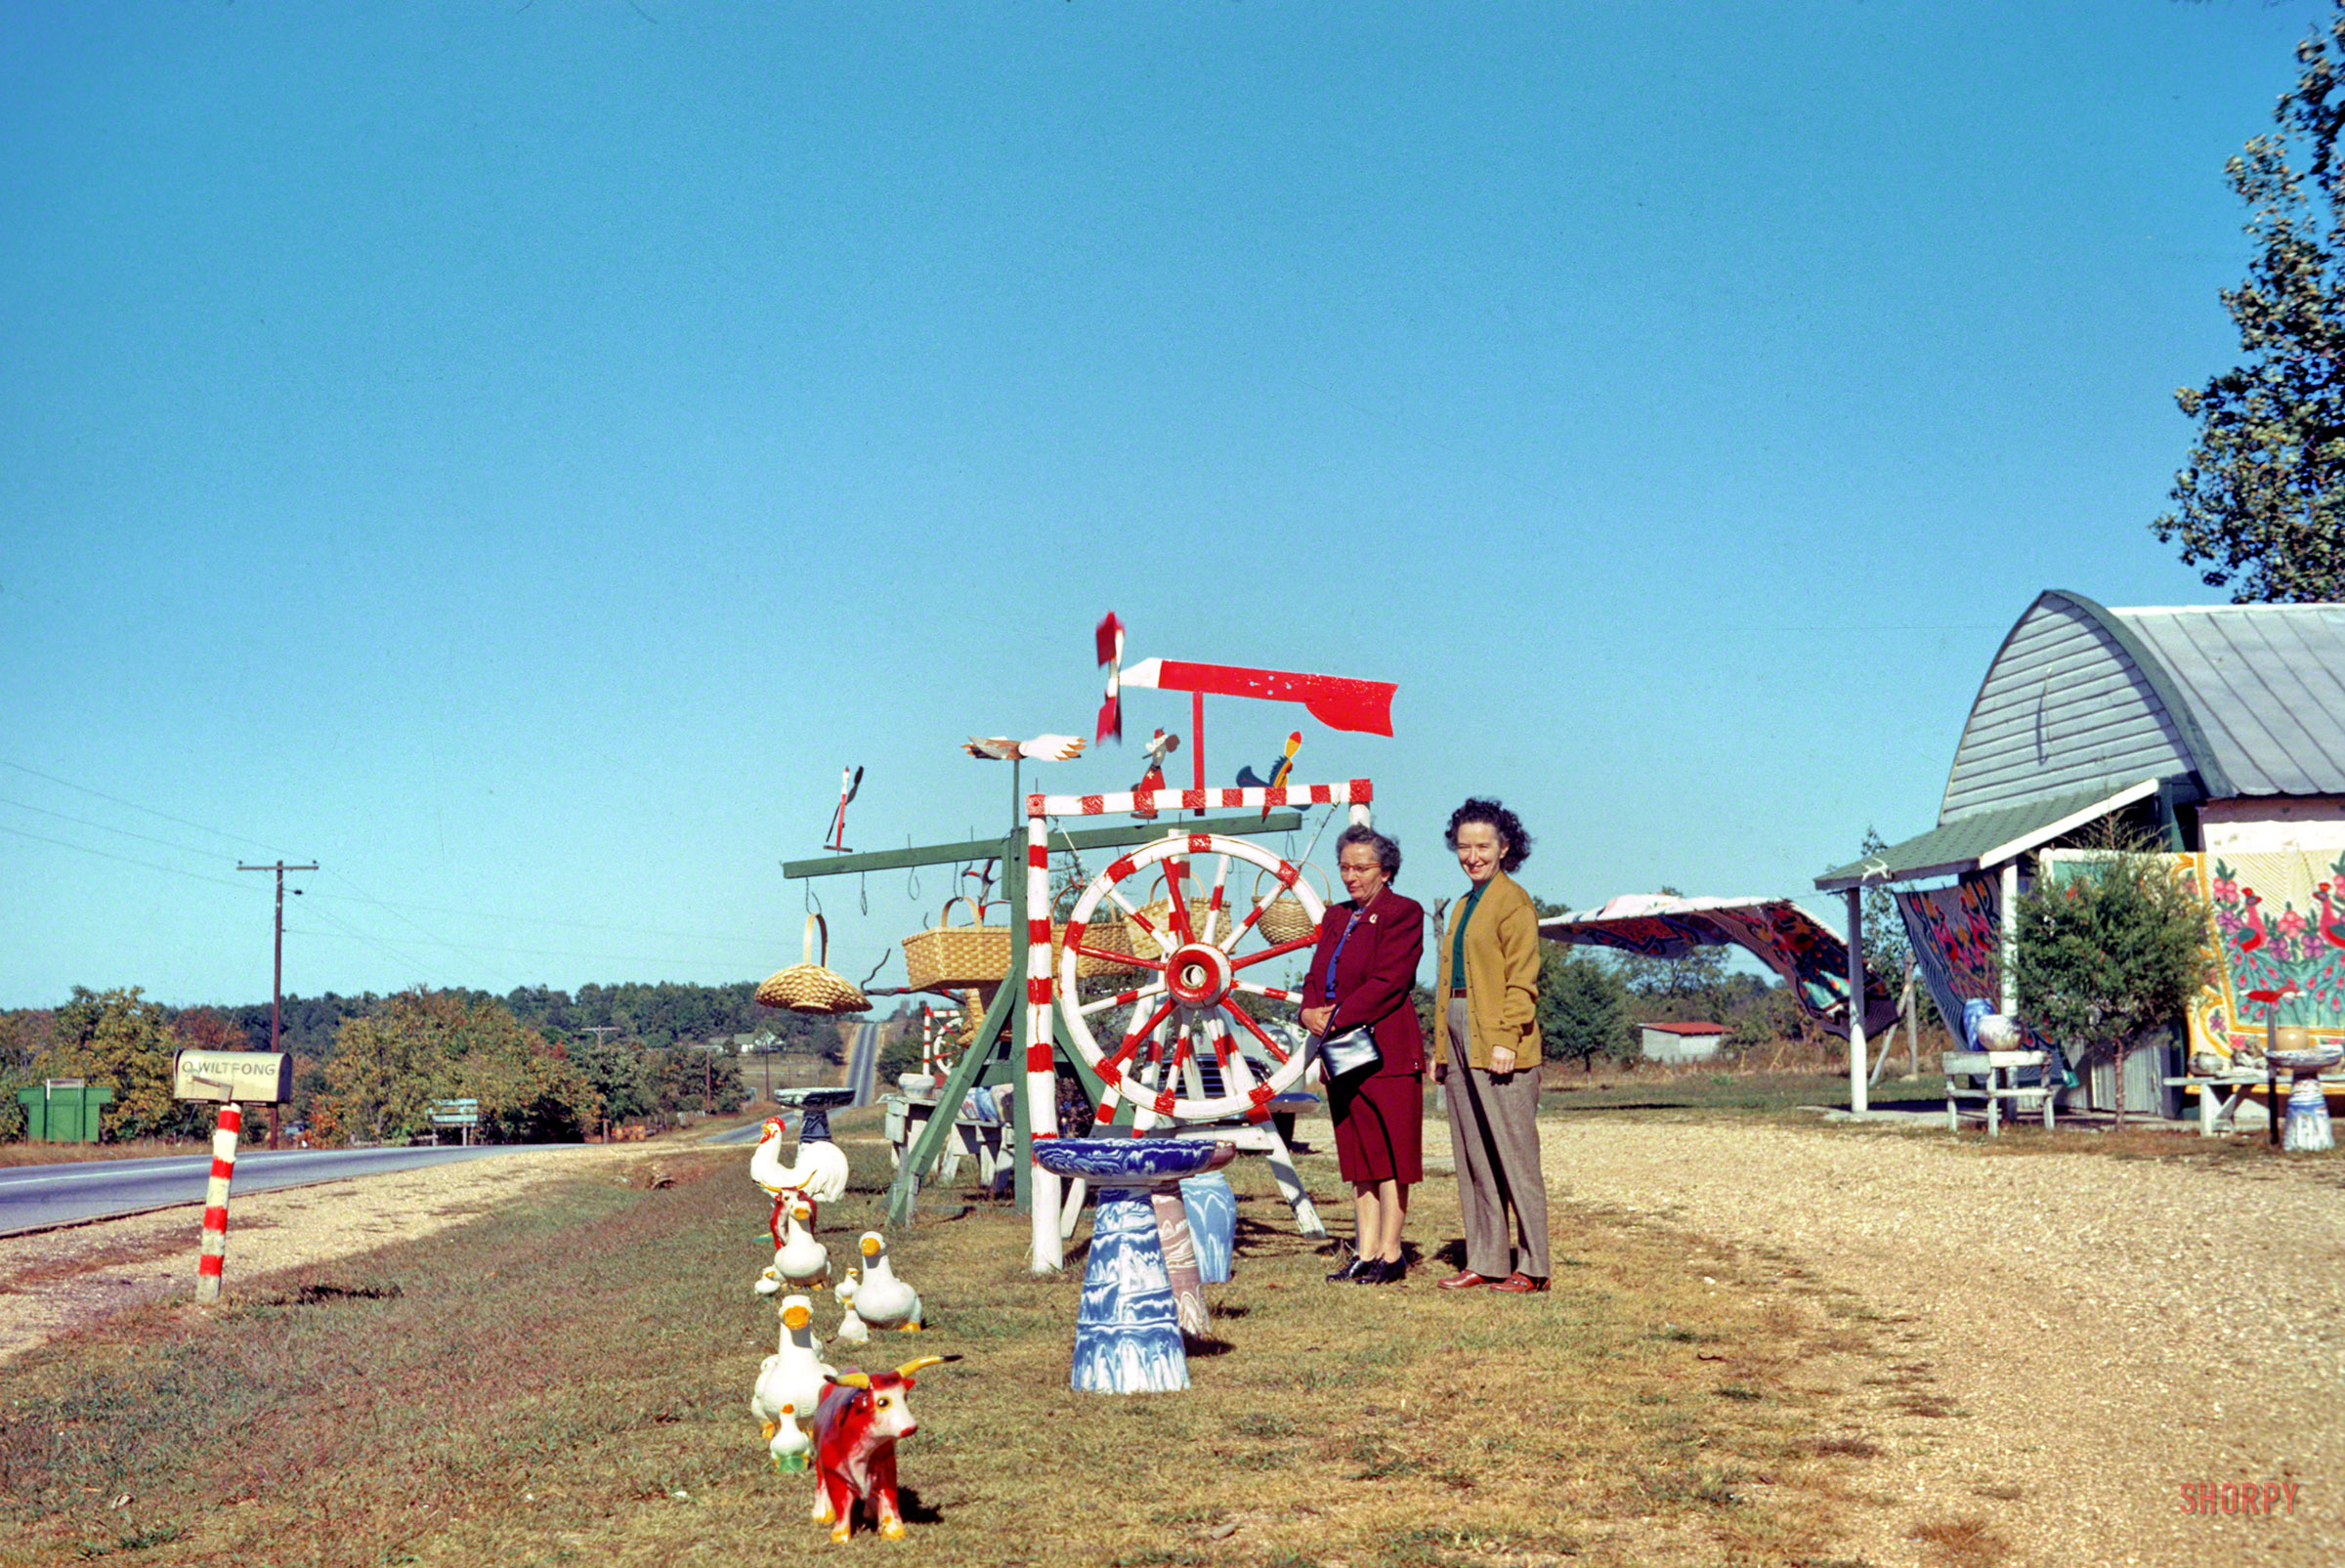 "6 Oct 1952. Clara & Grace at chenille & souvenir shop south of _______ ." We're back with Hubert and Grace on their road trip from Minnesota, the day before our previous photo was made at Eureka Springs, Arkansas. Where are we now? 35mm Kodachrome by Hubert Tuttle; paint by Dr. Seuss. View full size.